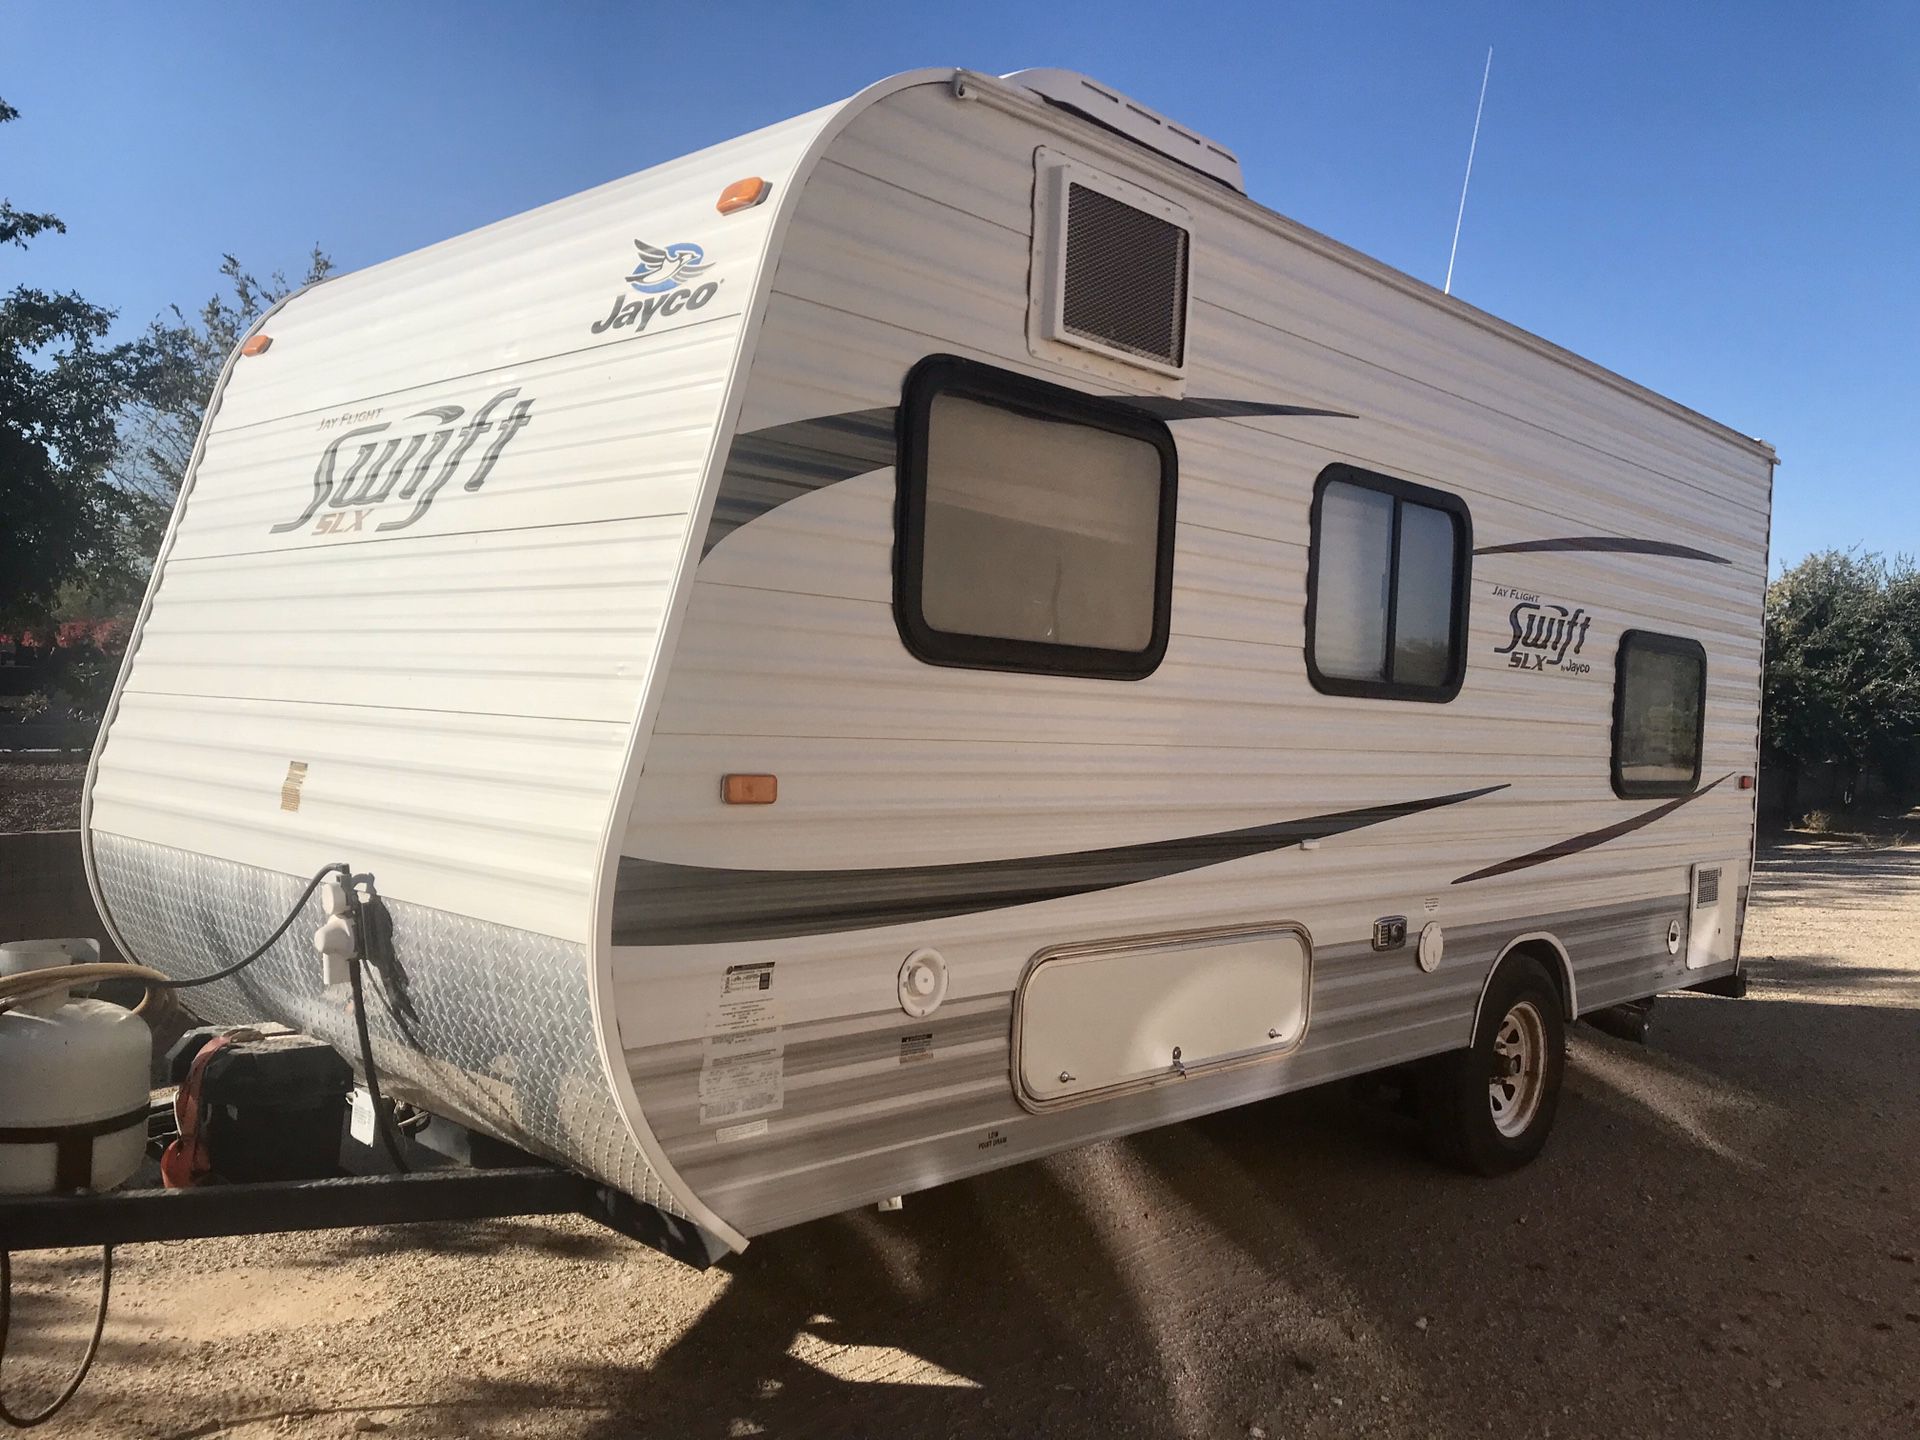 2013 Jayco Swift travel trailer. 18 foot. excellent condition